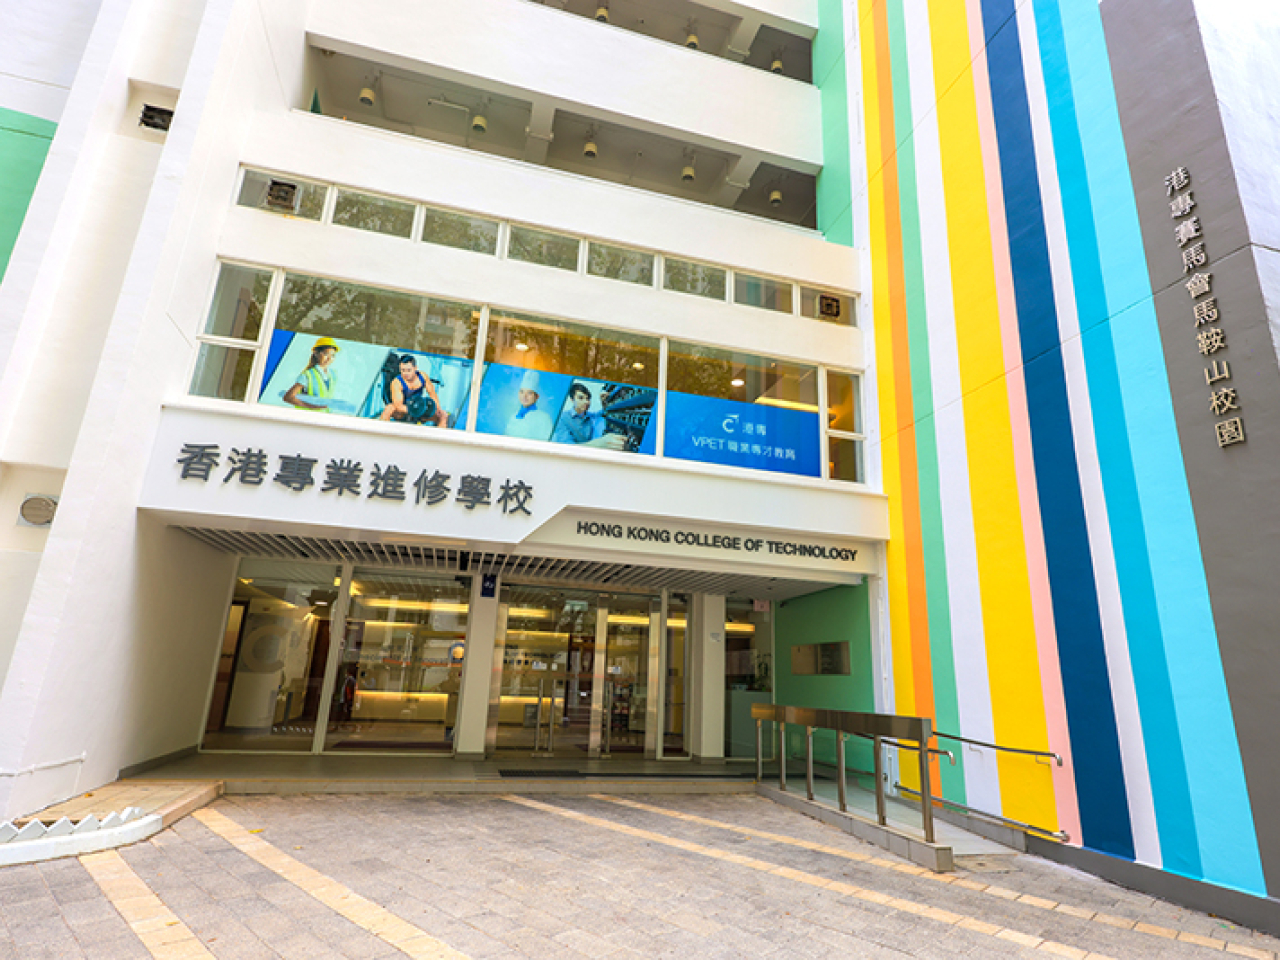 Thousands affected by cyber attack on HK college